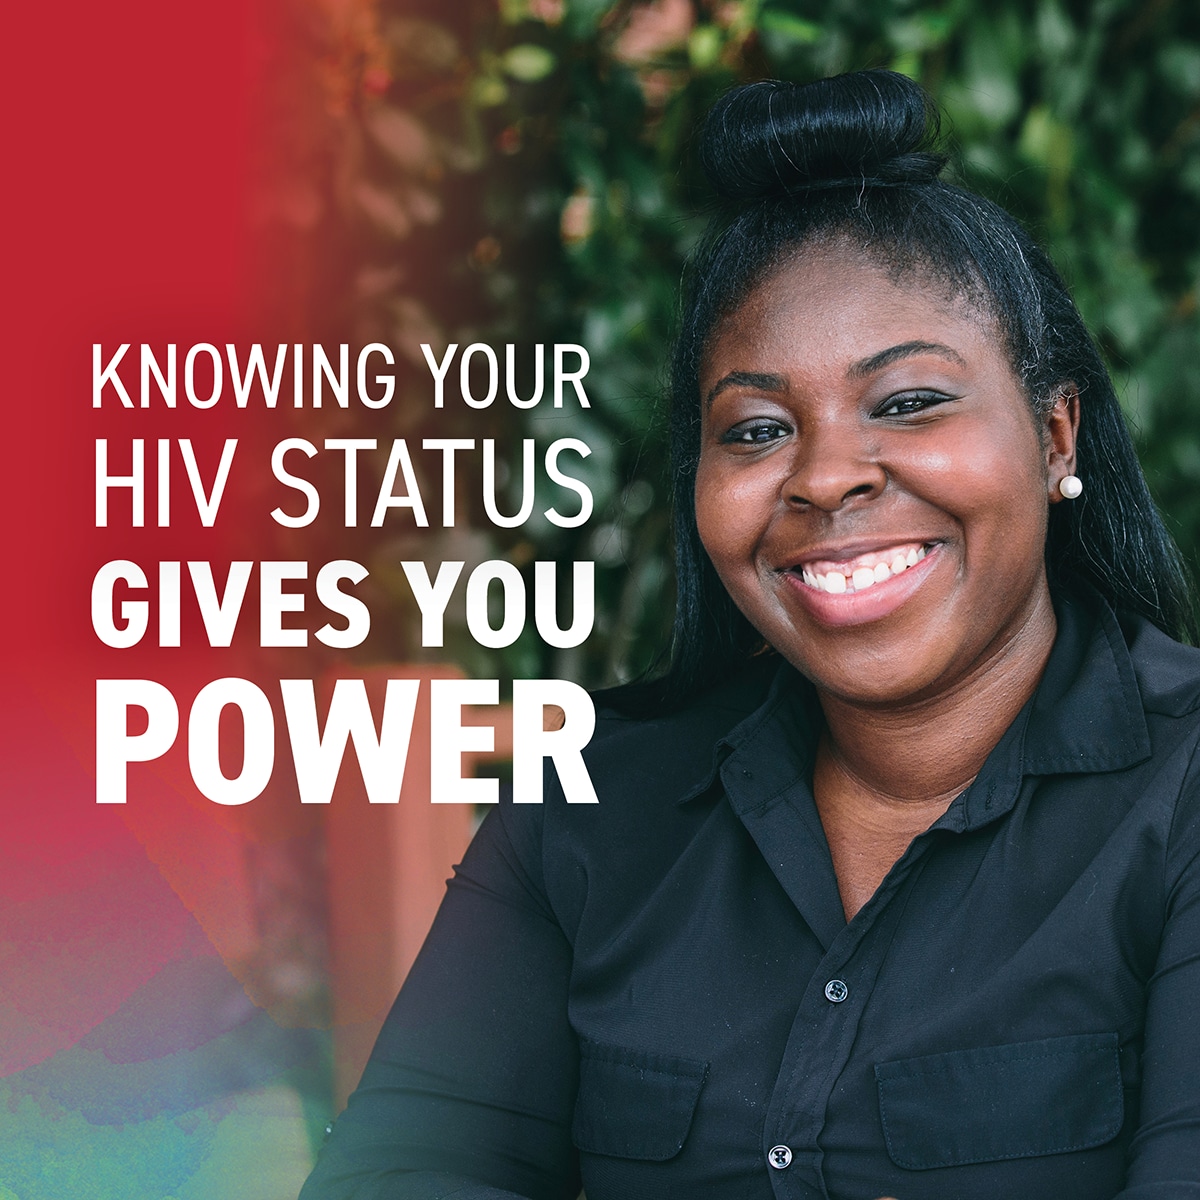 Knowing your HIV status gives you power.